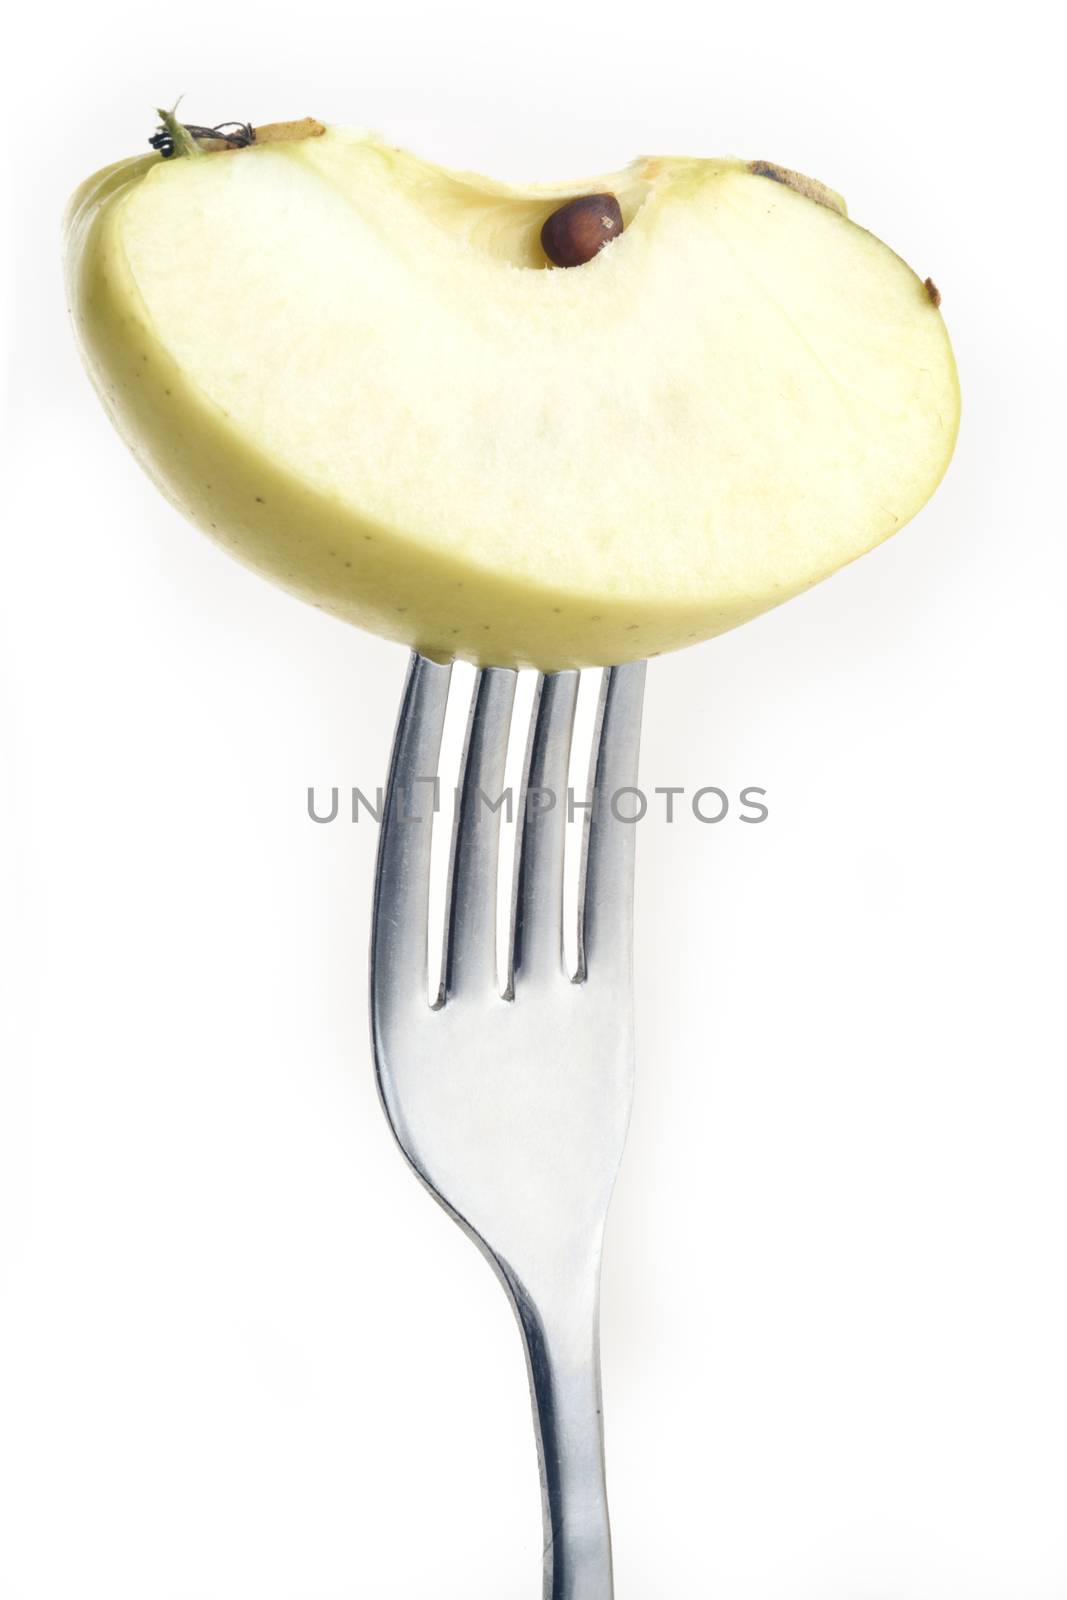 Apple on fork by gemphotography